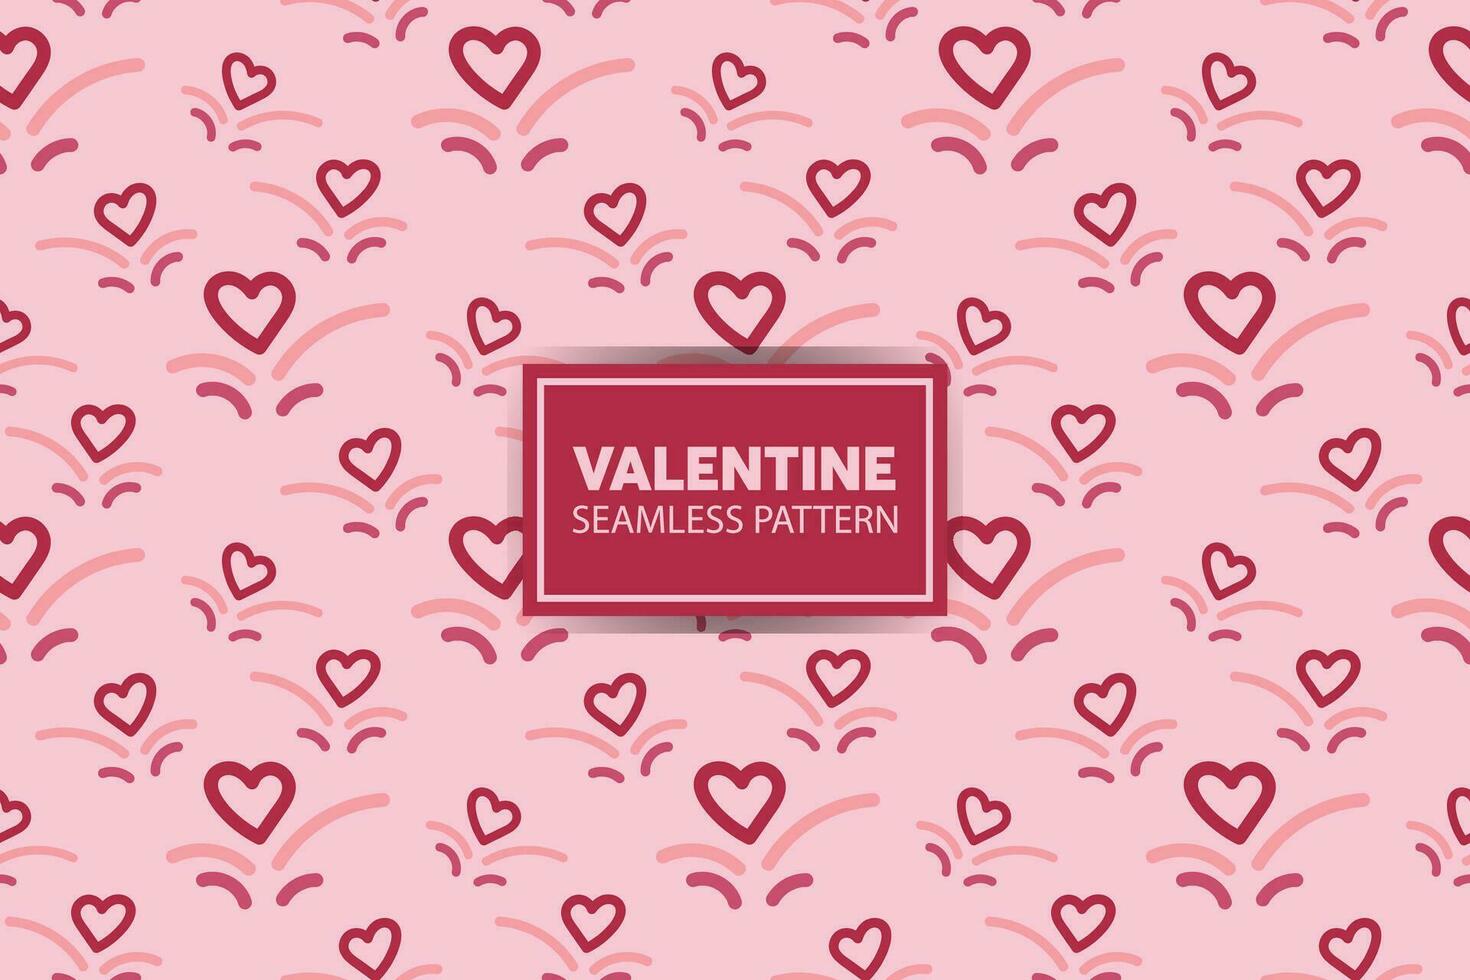 seamless pattern background of hearts with cute style in pink color vector